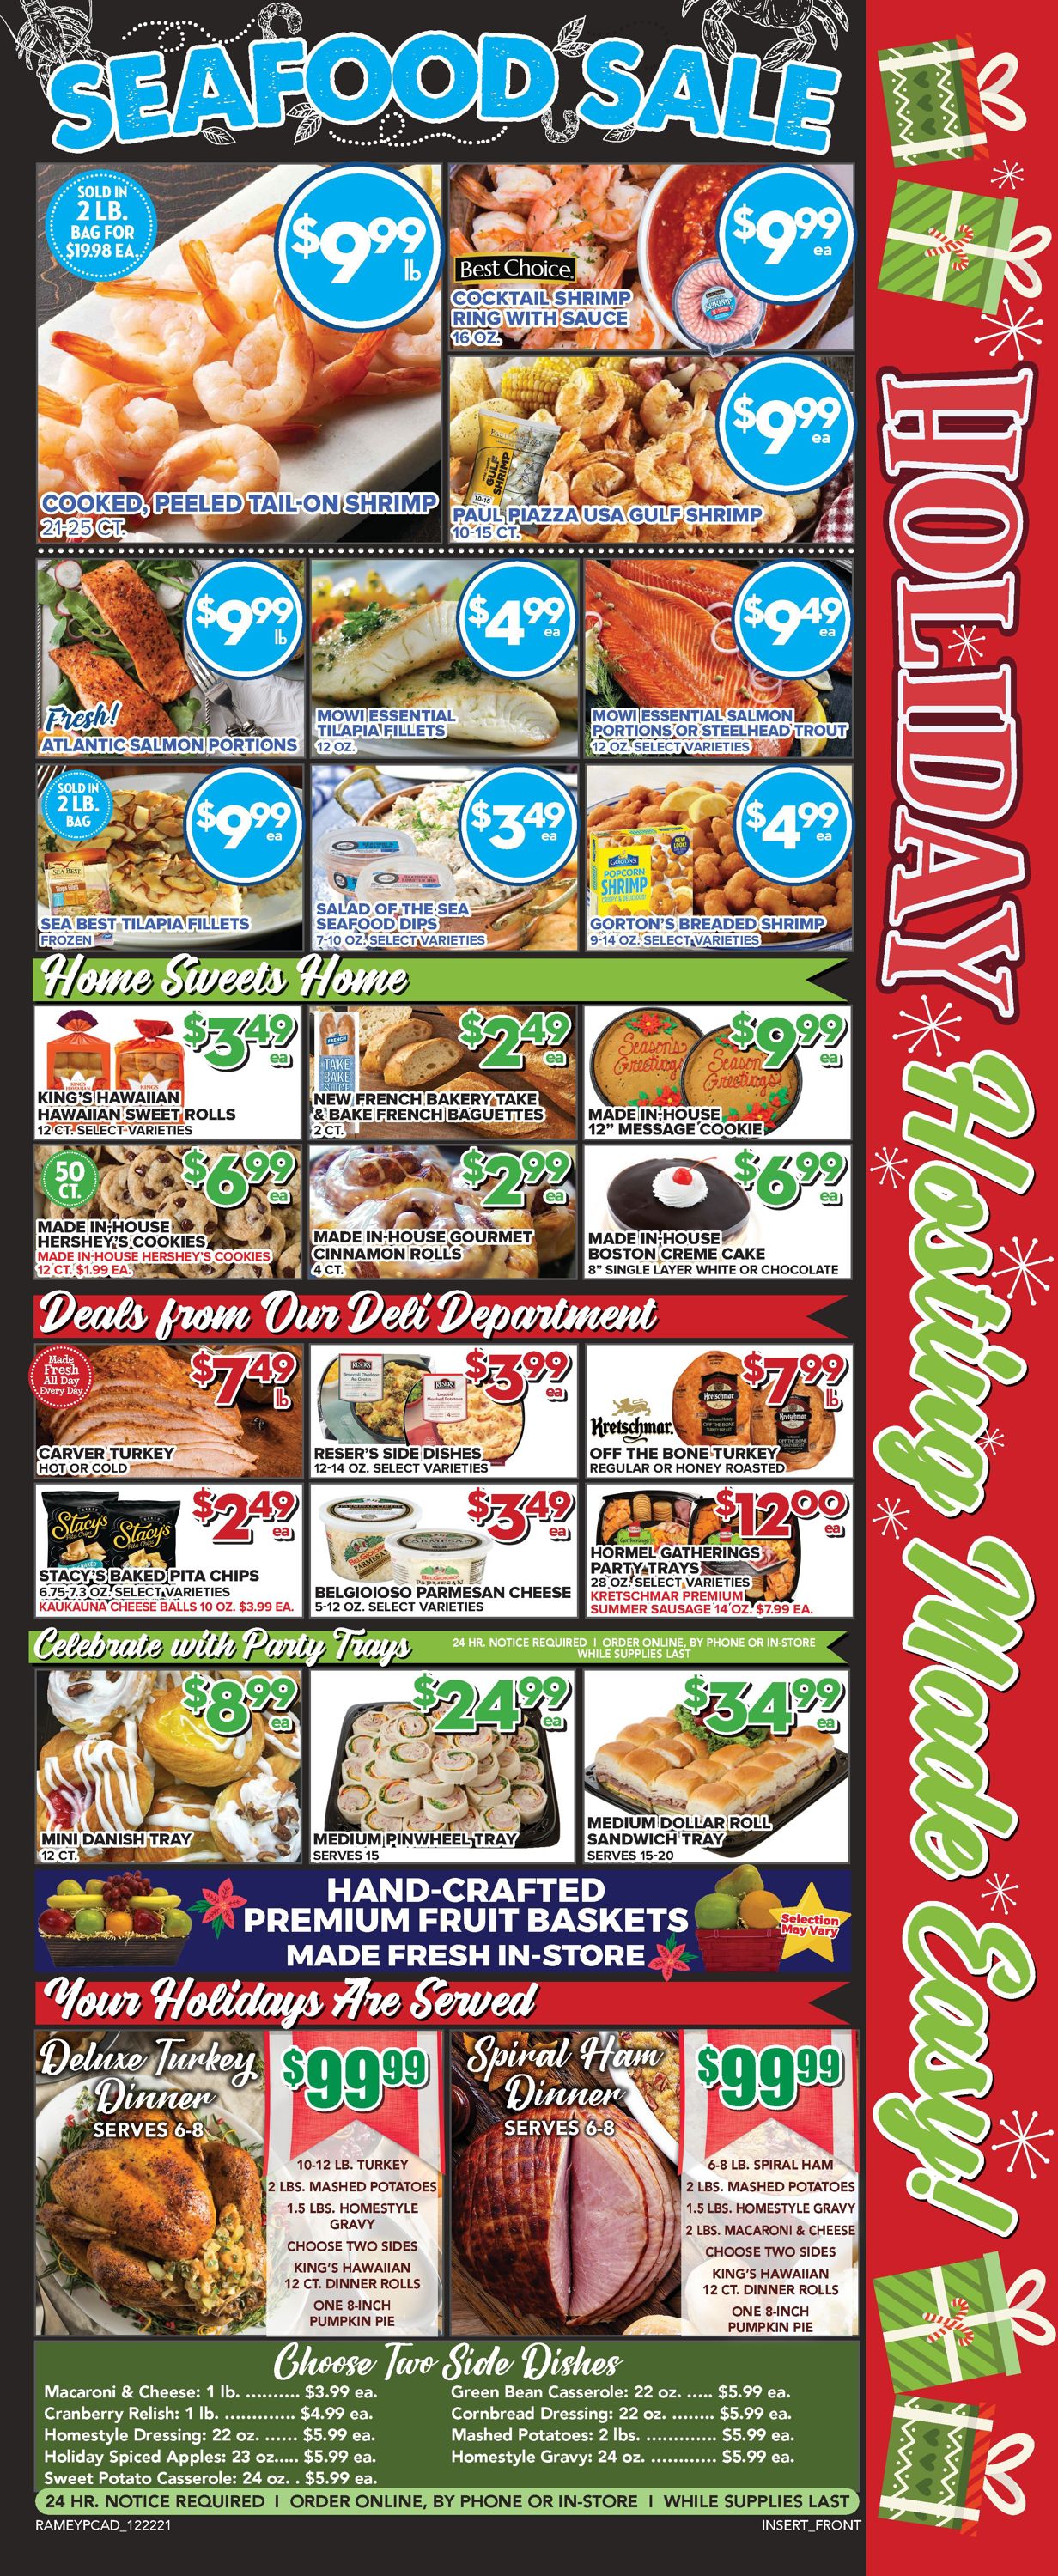 Price Cutter CHRISTMAS 2021 Weekly Ad Circular - valid 12/22-12/28/2021 (Page 5)